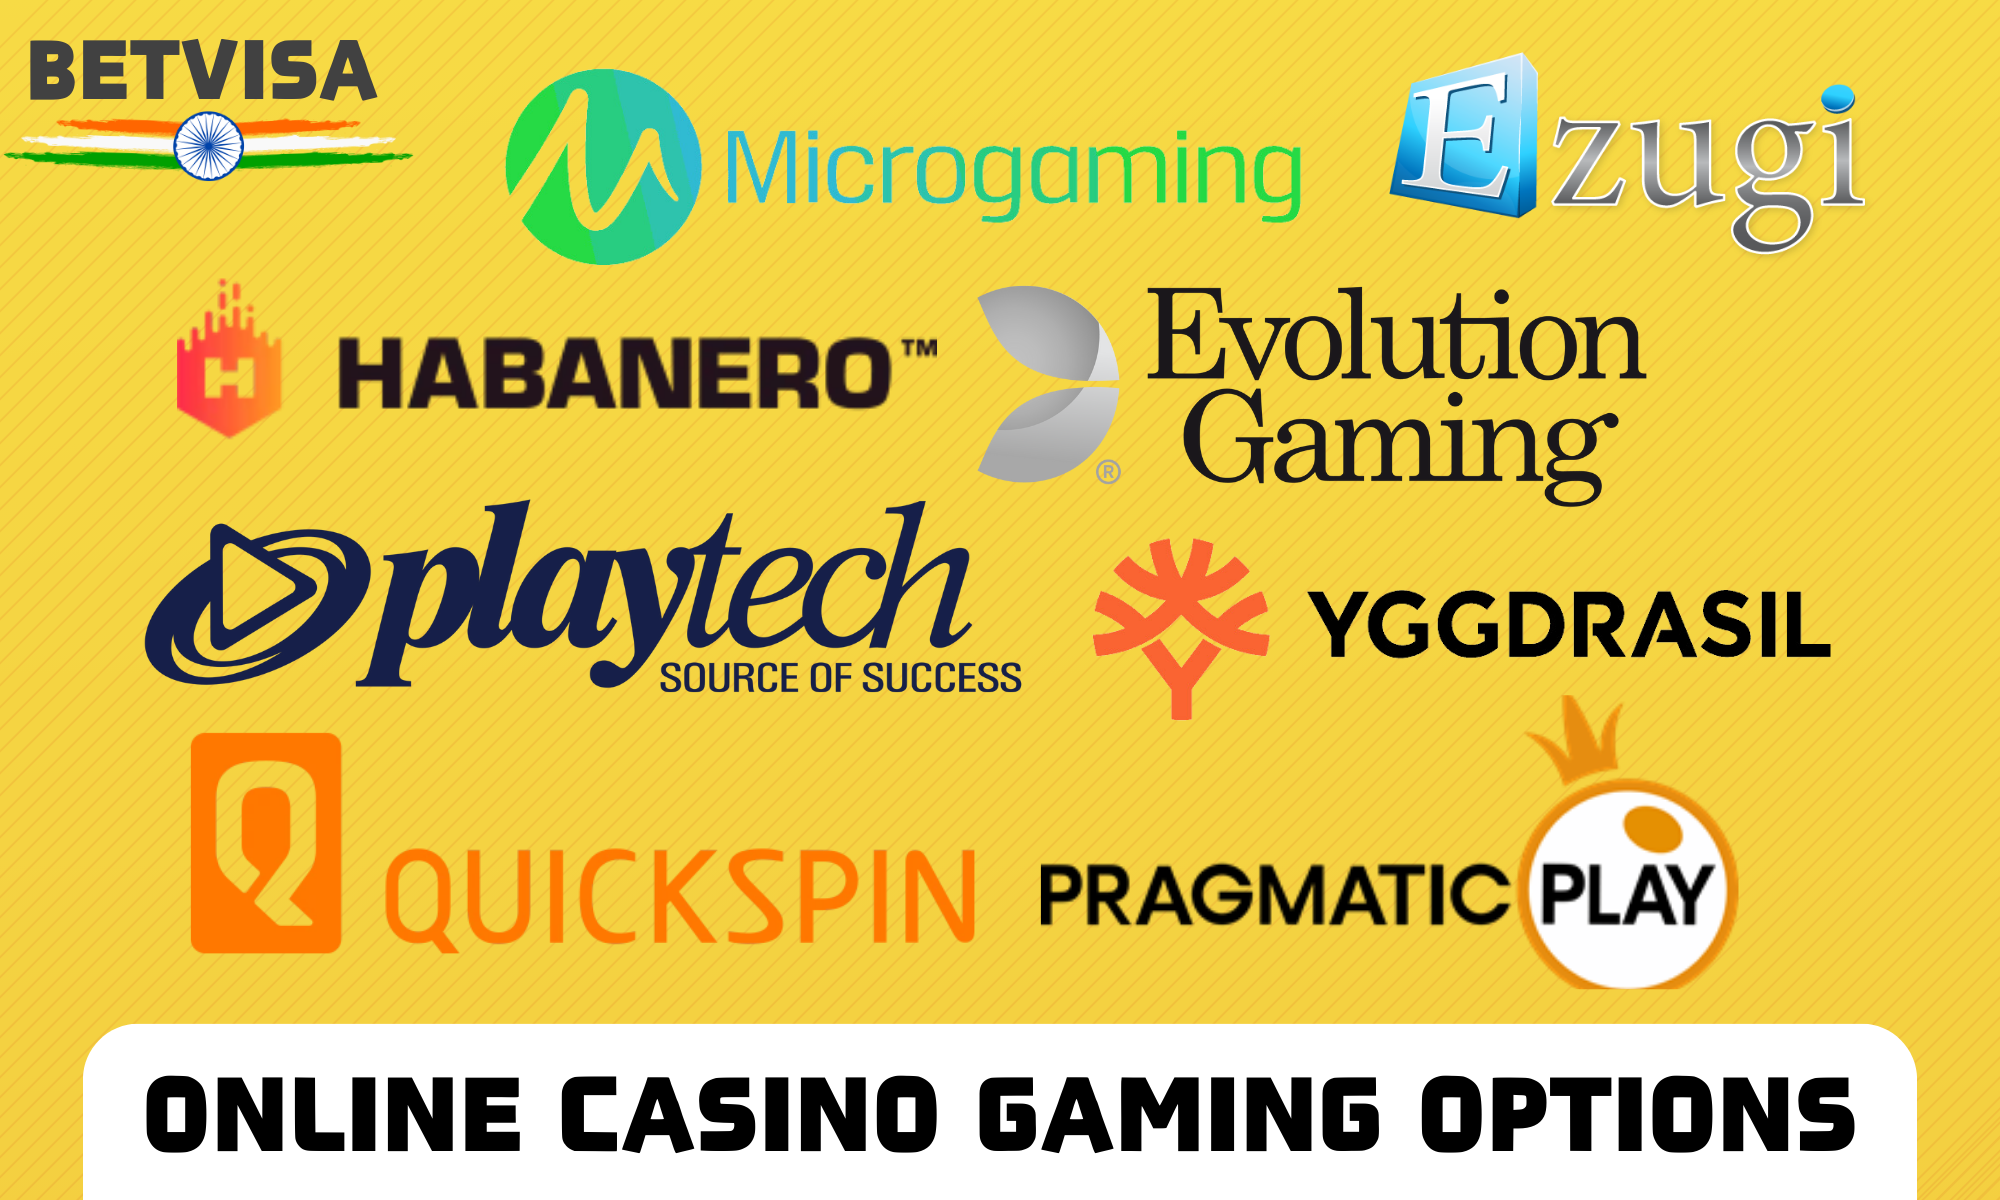 Top game providers available at Betvisa